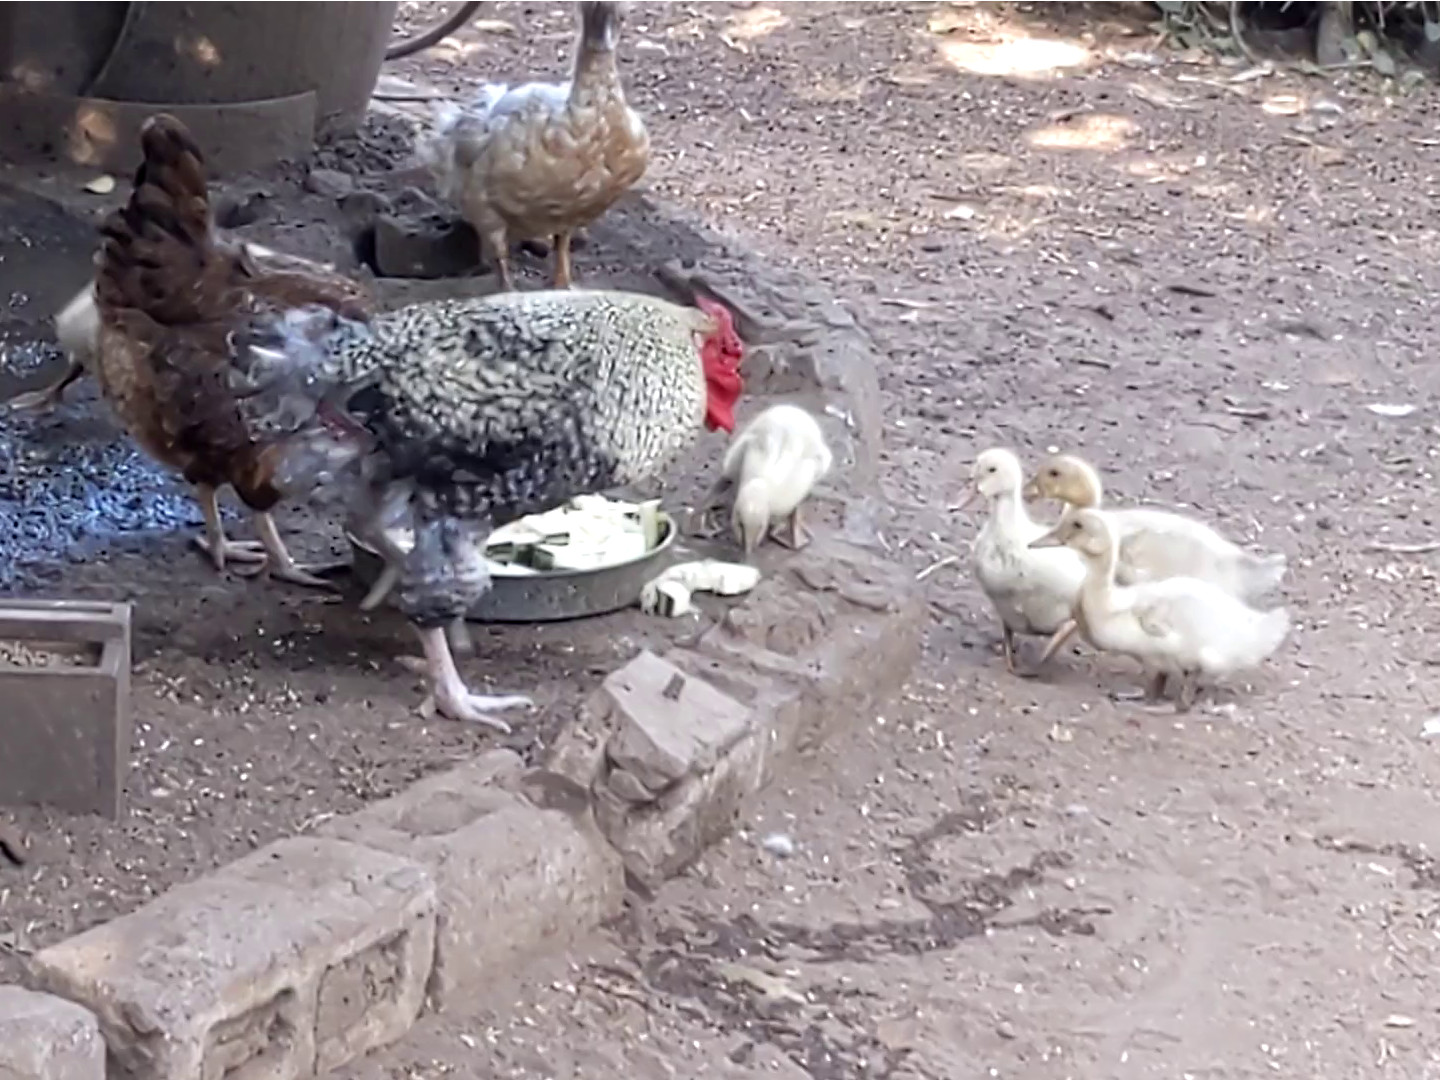 Rooster faces off with 3 ducklings